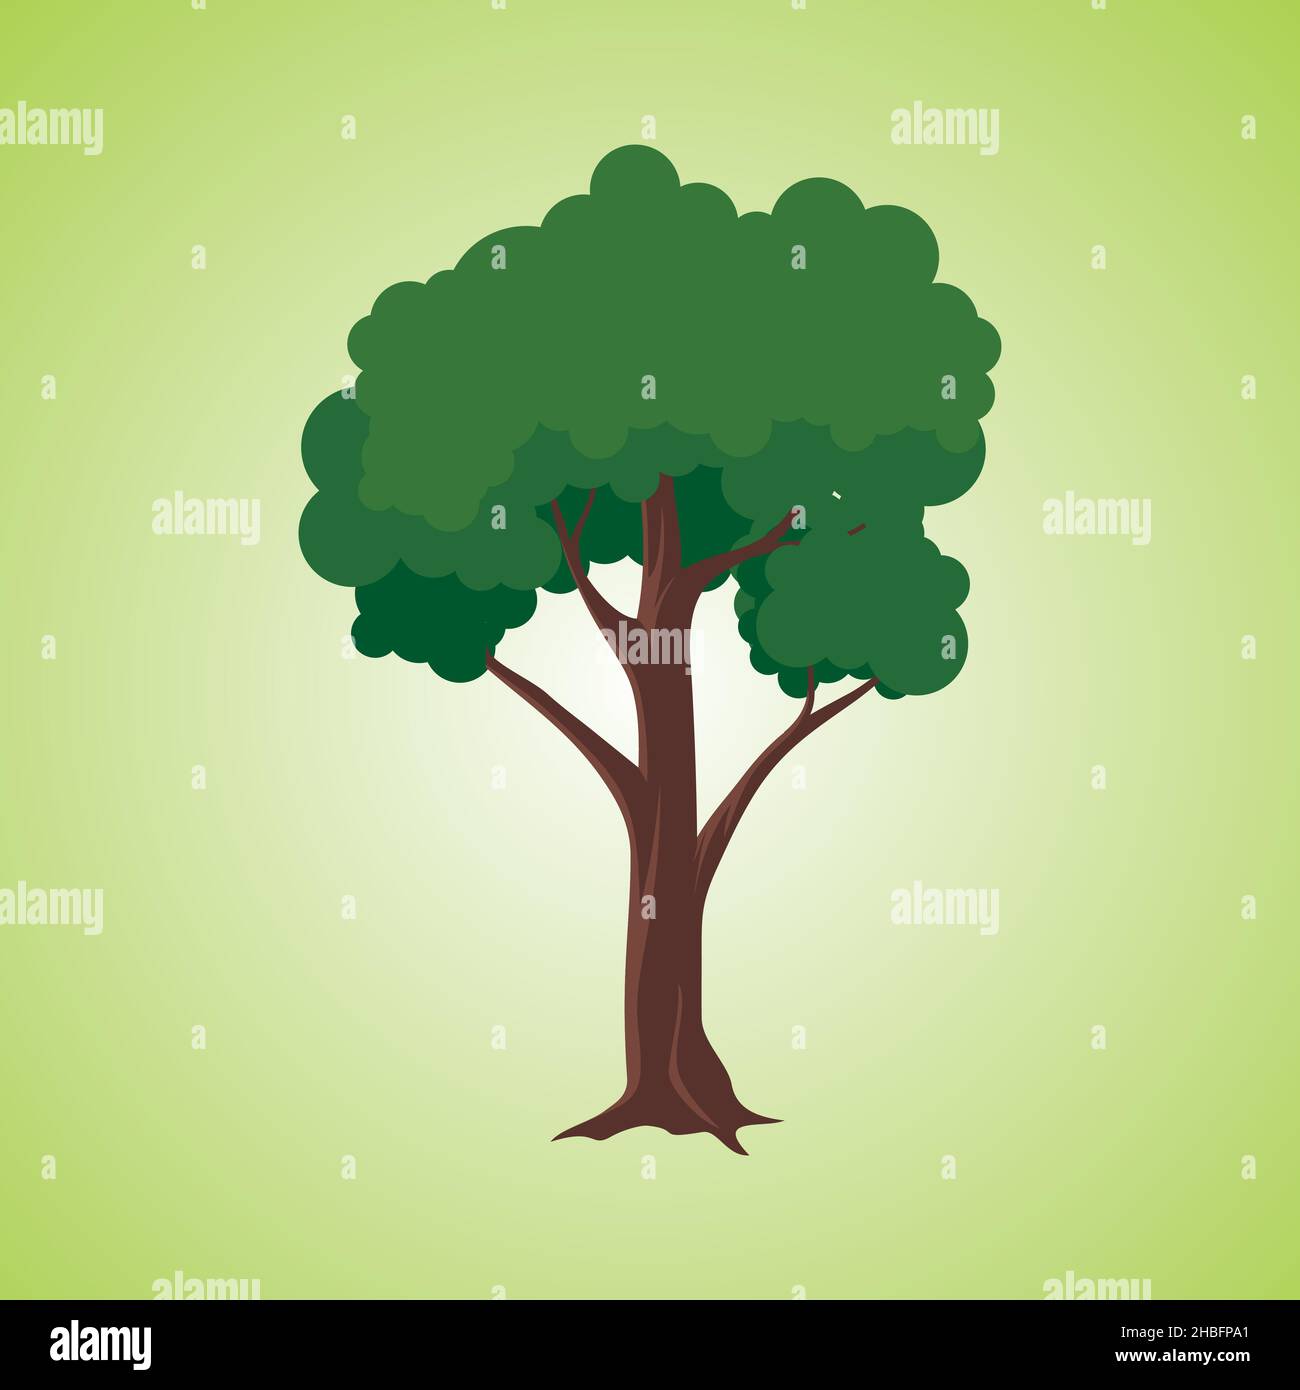 Tree and roots cartoon Stock Vector Images - Alamy